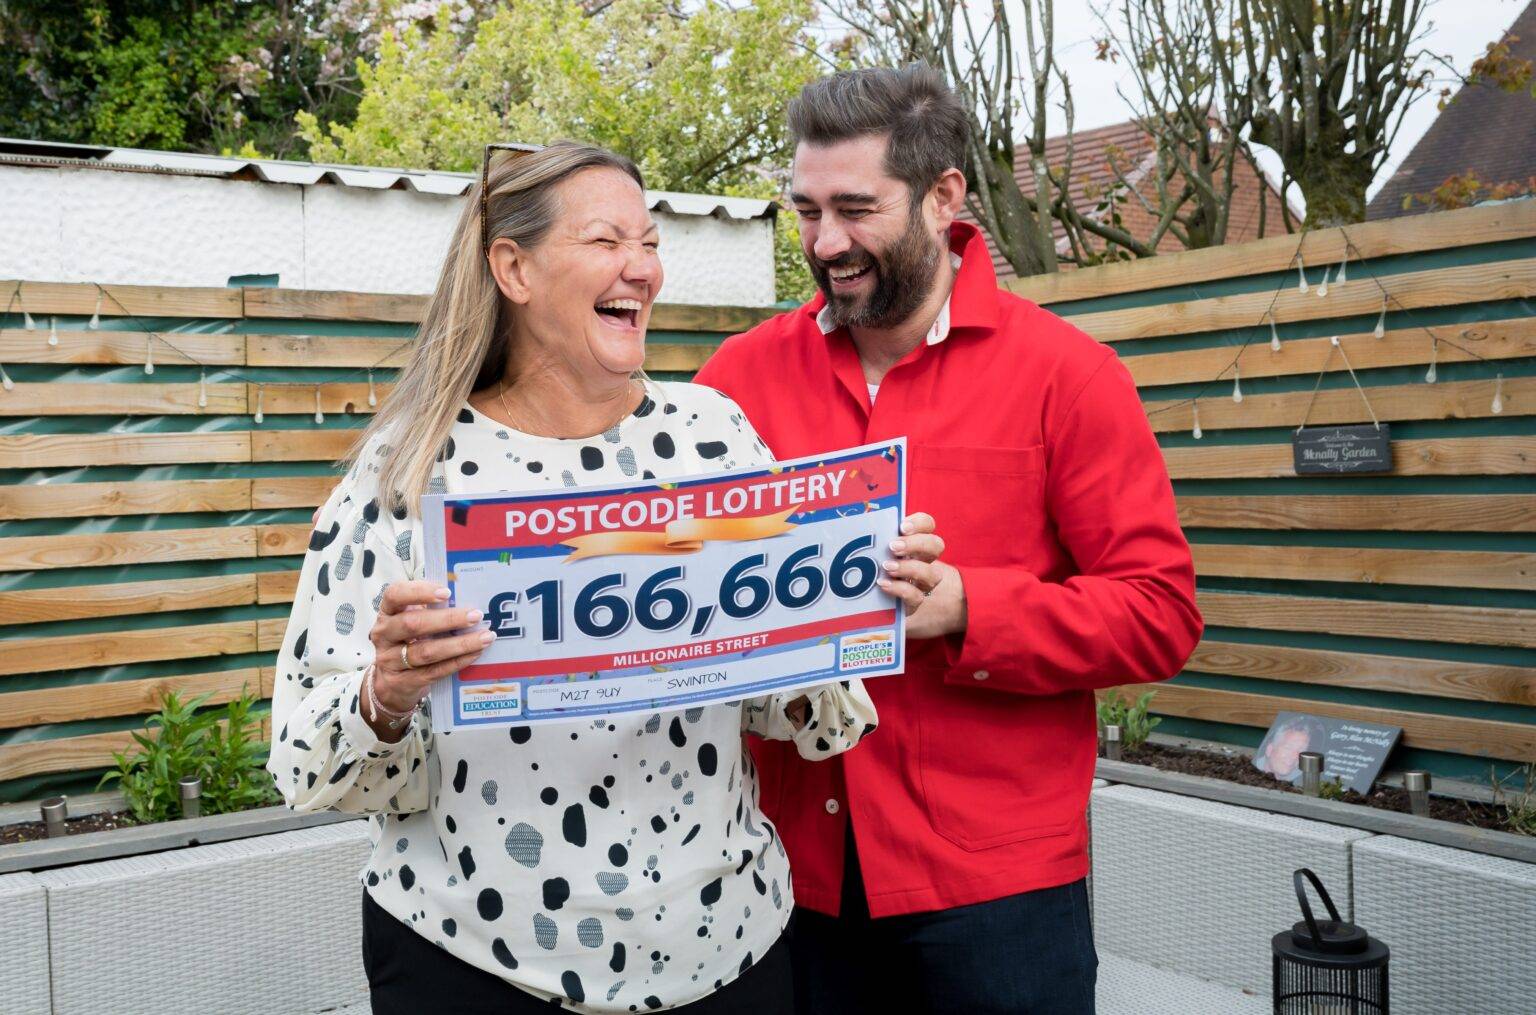 How a doting dad left his widow a £166,000 surprise with postcode lottery ticket